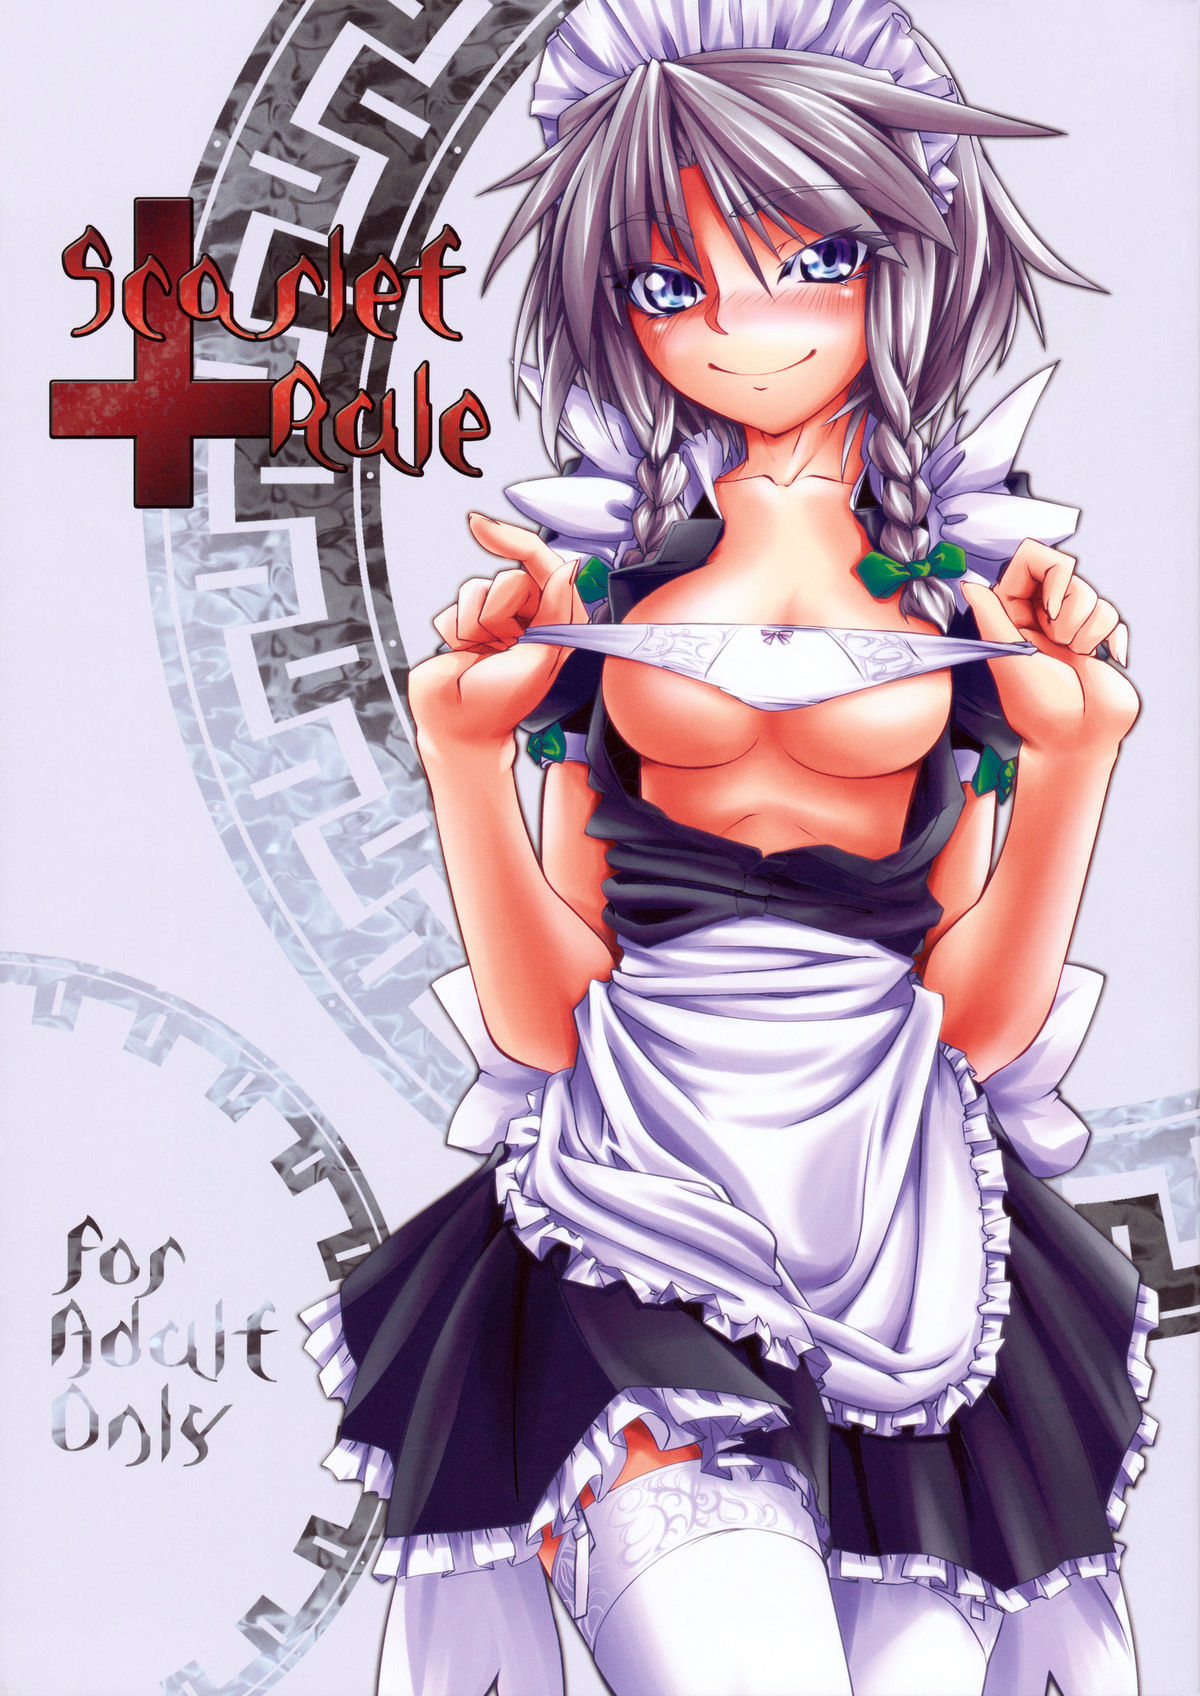 [Kaibidou] Scarlet Rule (Touhou Project) [English] [UMAD] (同人誌) [快微動] Scarlet Rule (東方) [英訳]